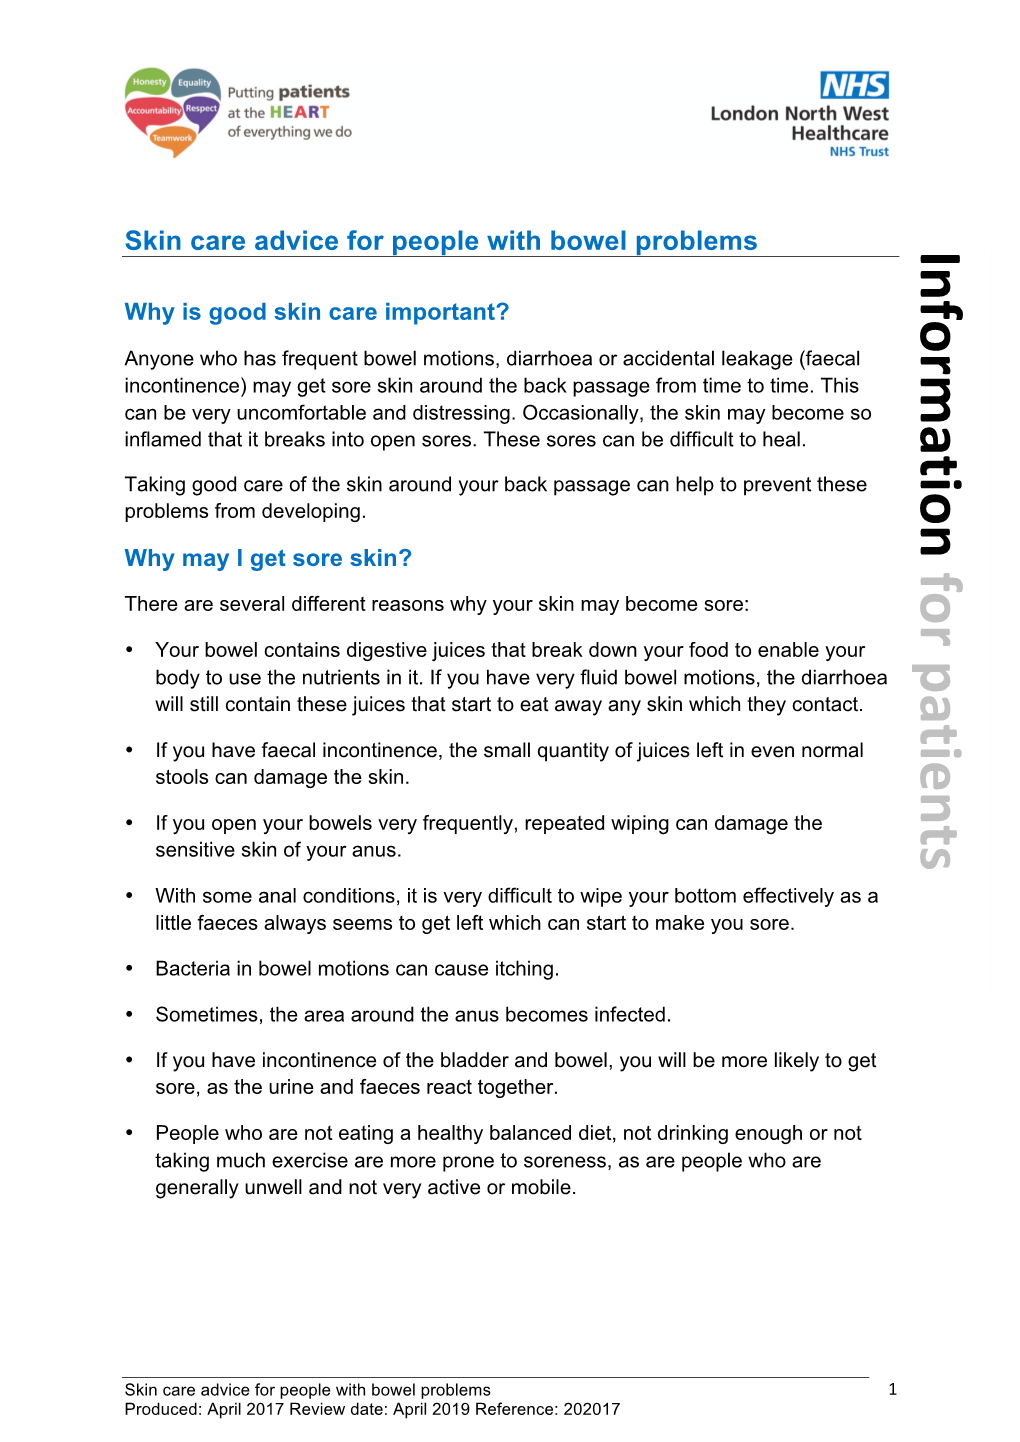 Skin Care Advice for People with Bowel Problems Information